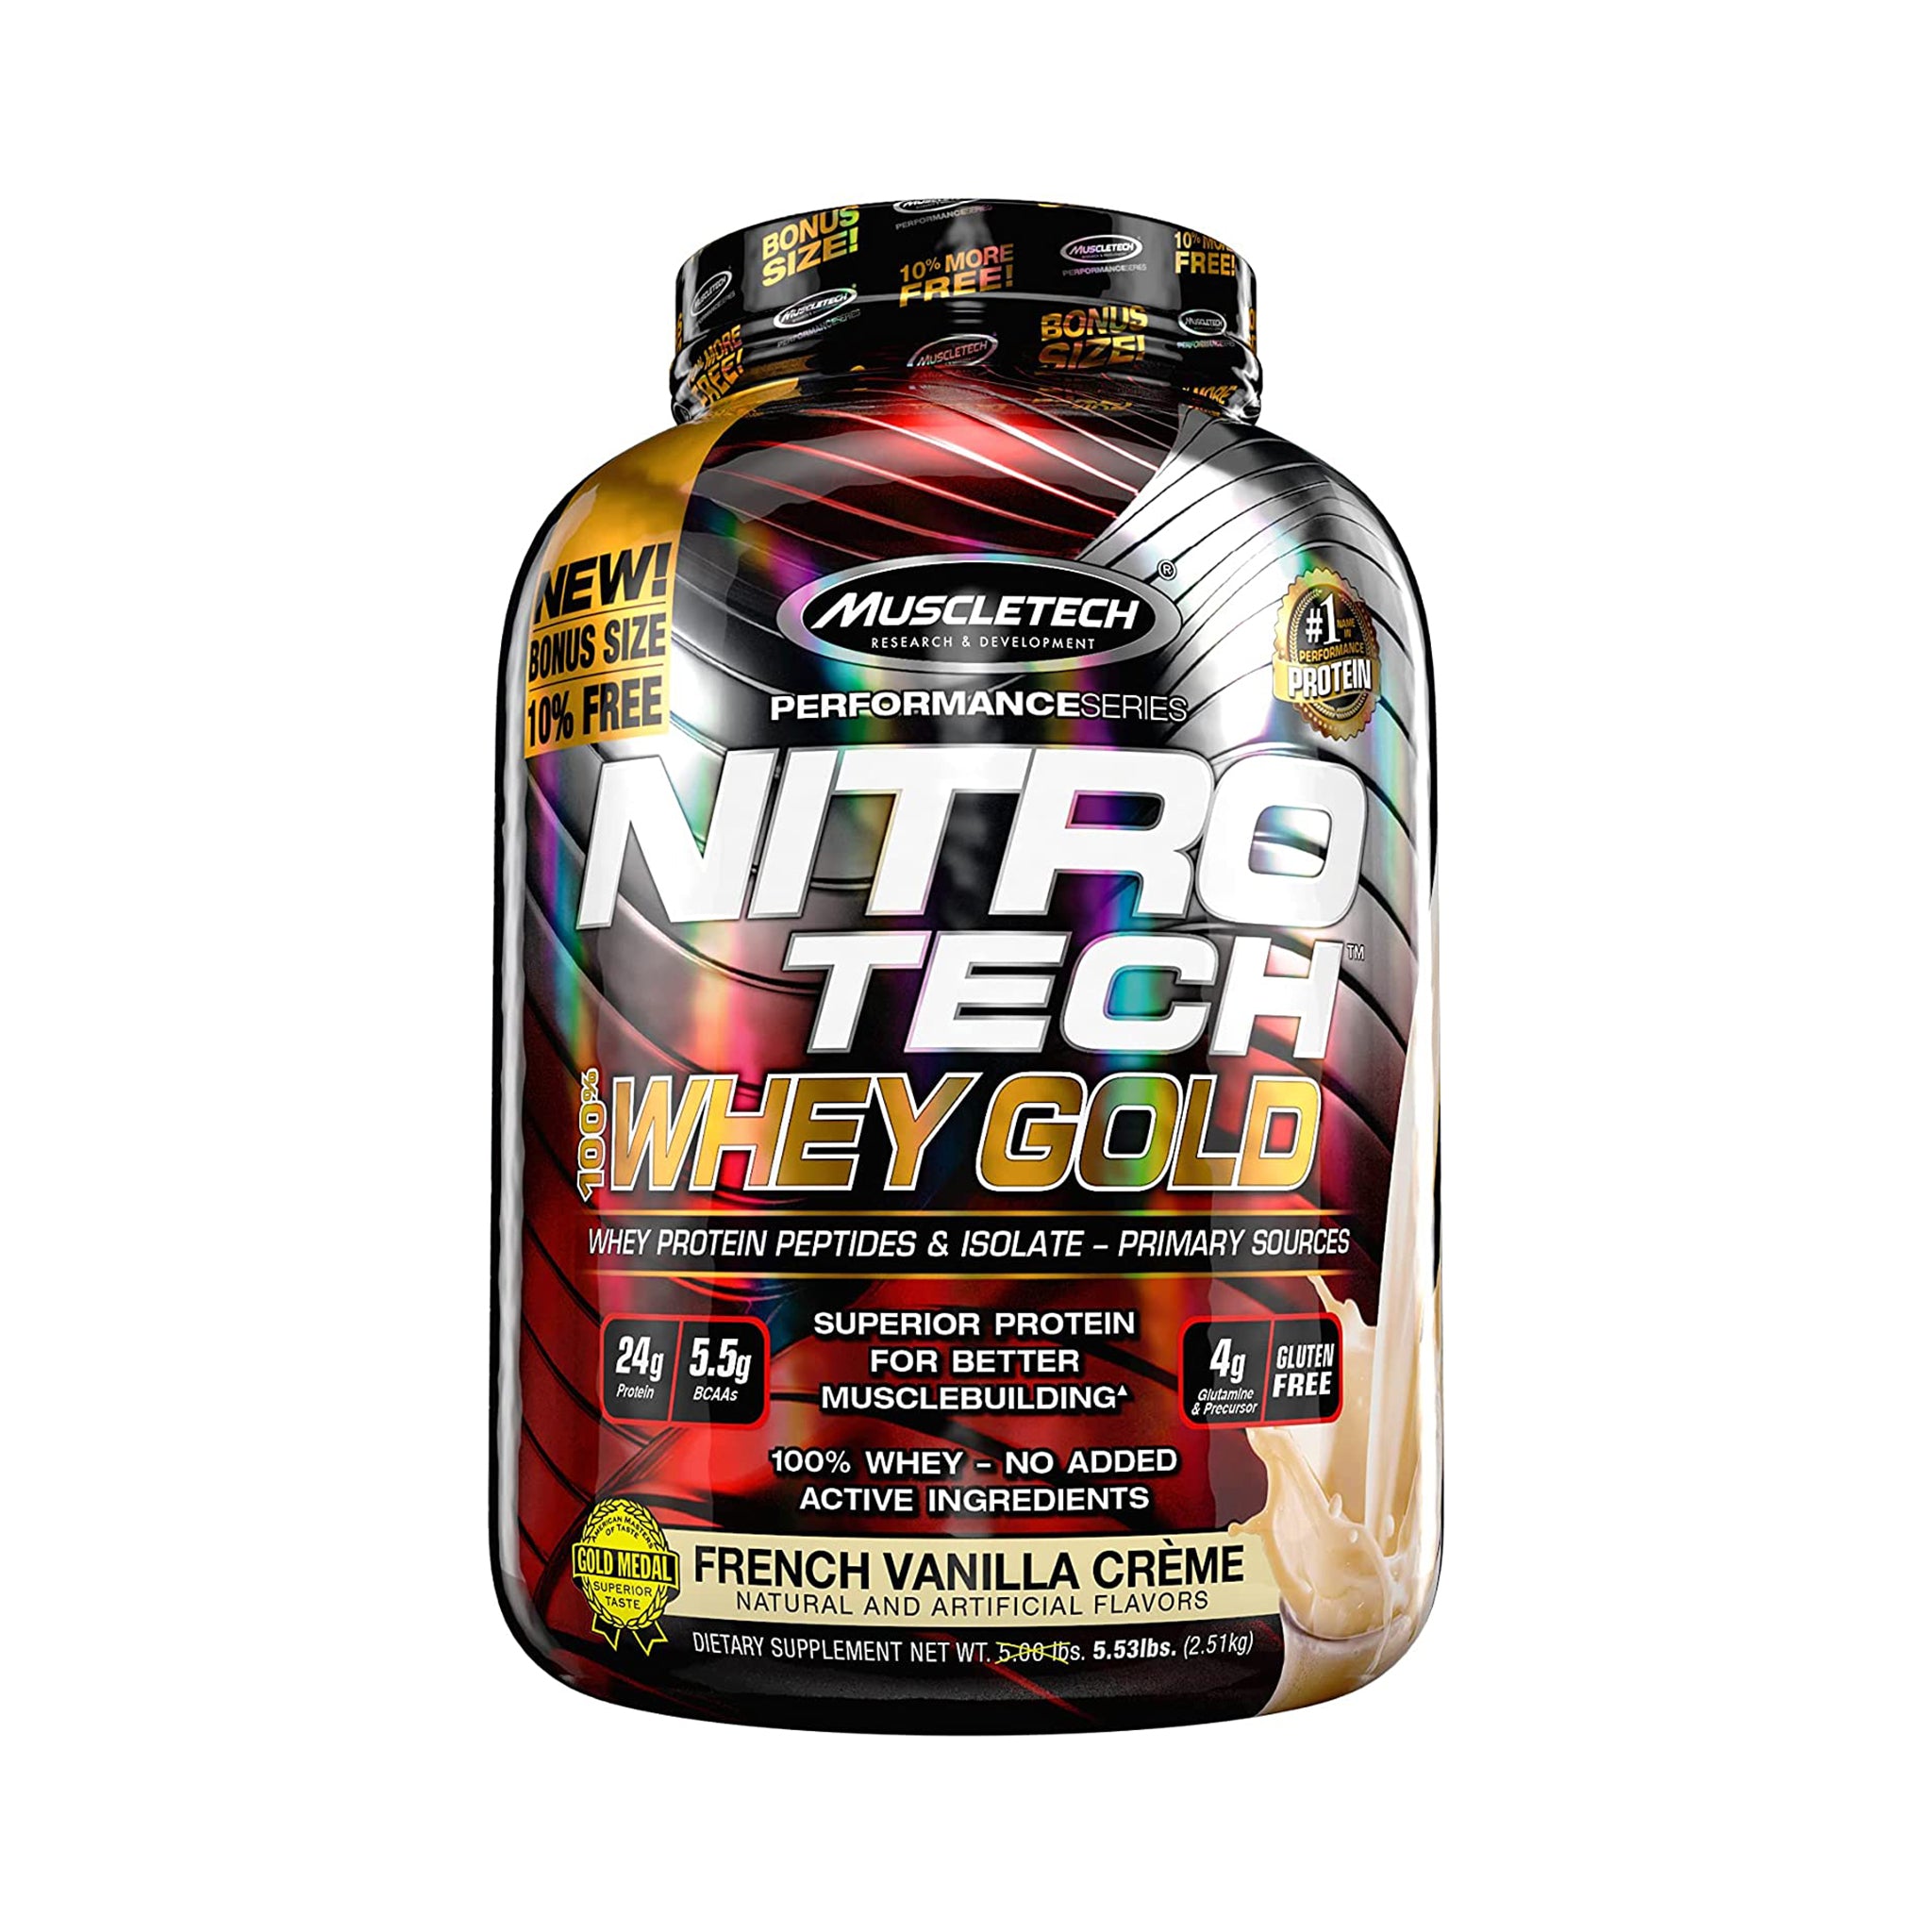 MuscleTech NitroTech Whey Gold, 100% Whey Protein Powder - French Vanilla Creme - 5.54 lbs